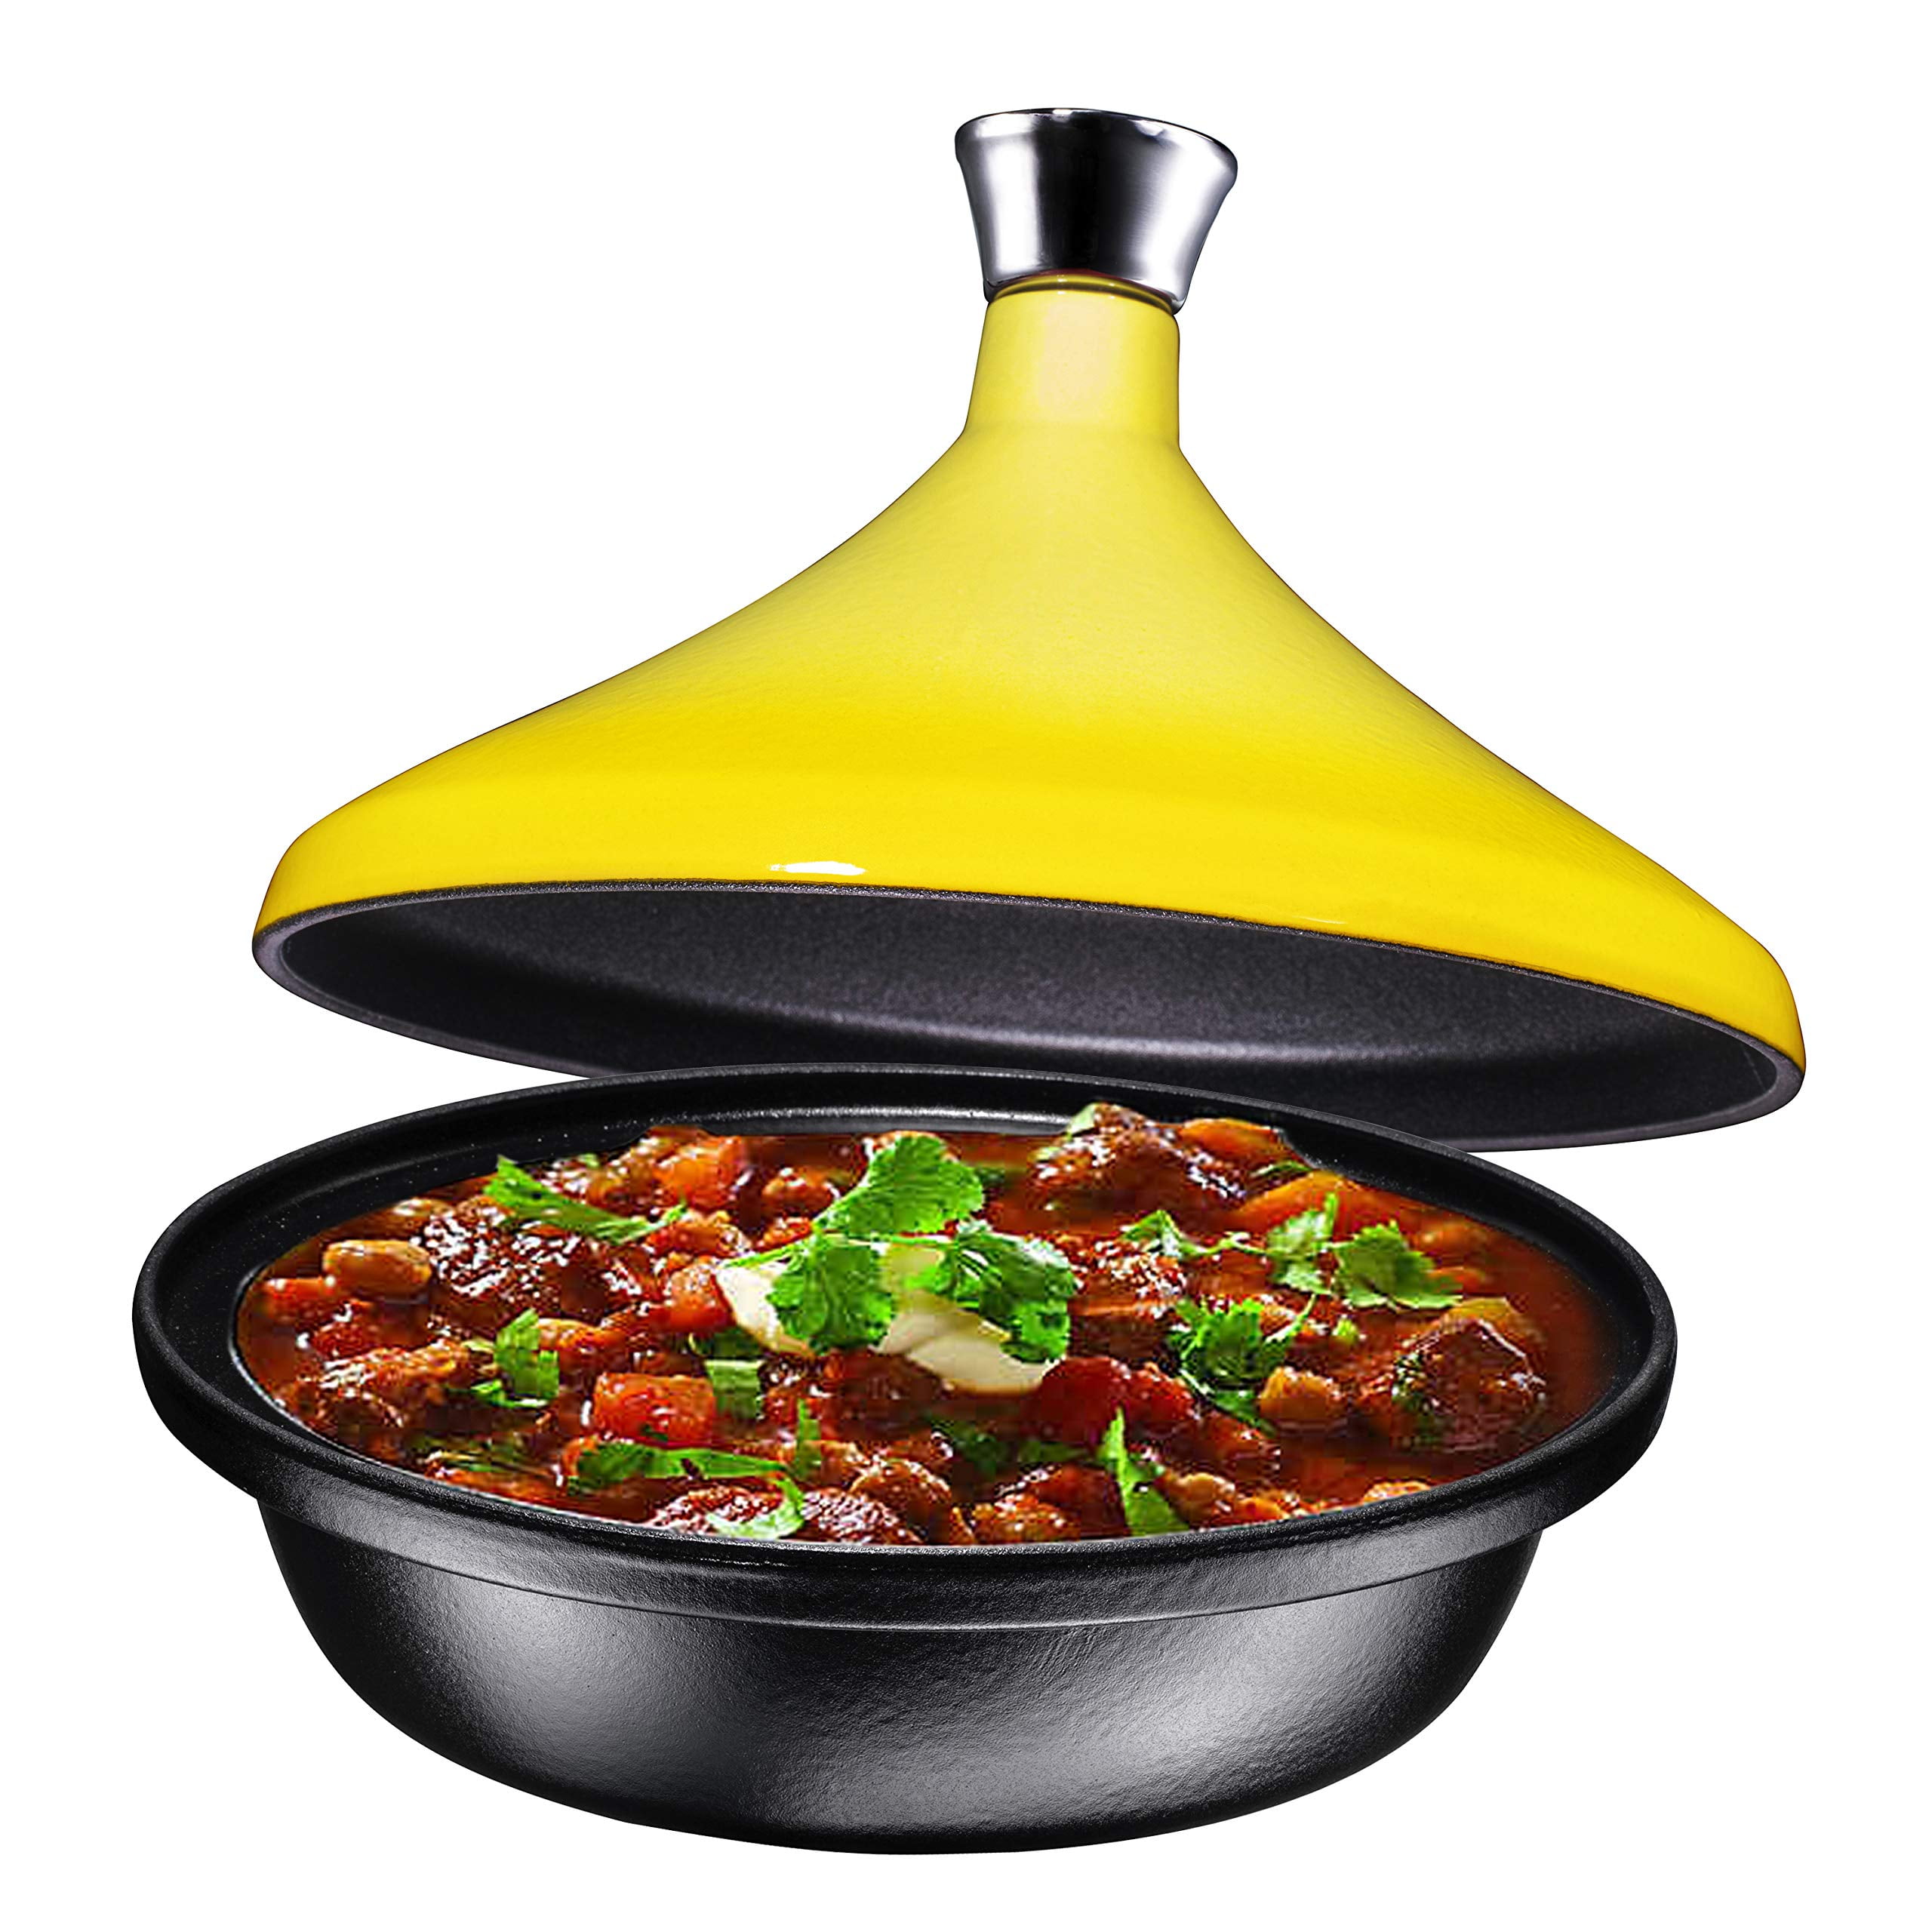 Ainsley Moroccan Tagine Flavour Bomb (90g) - Compare Prices & Where To Buy  